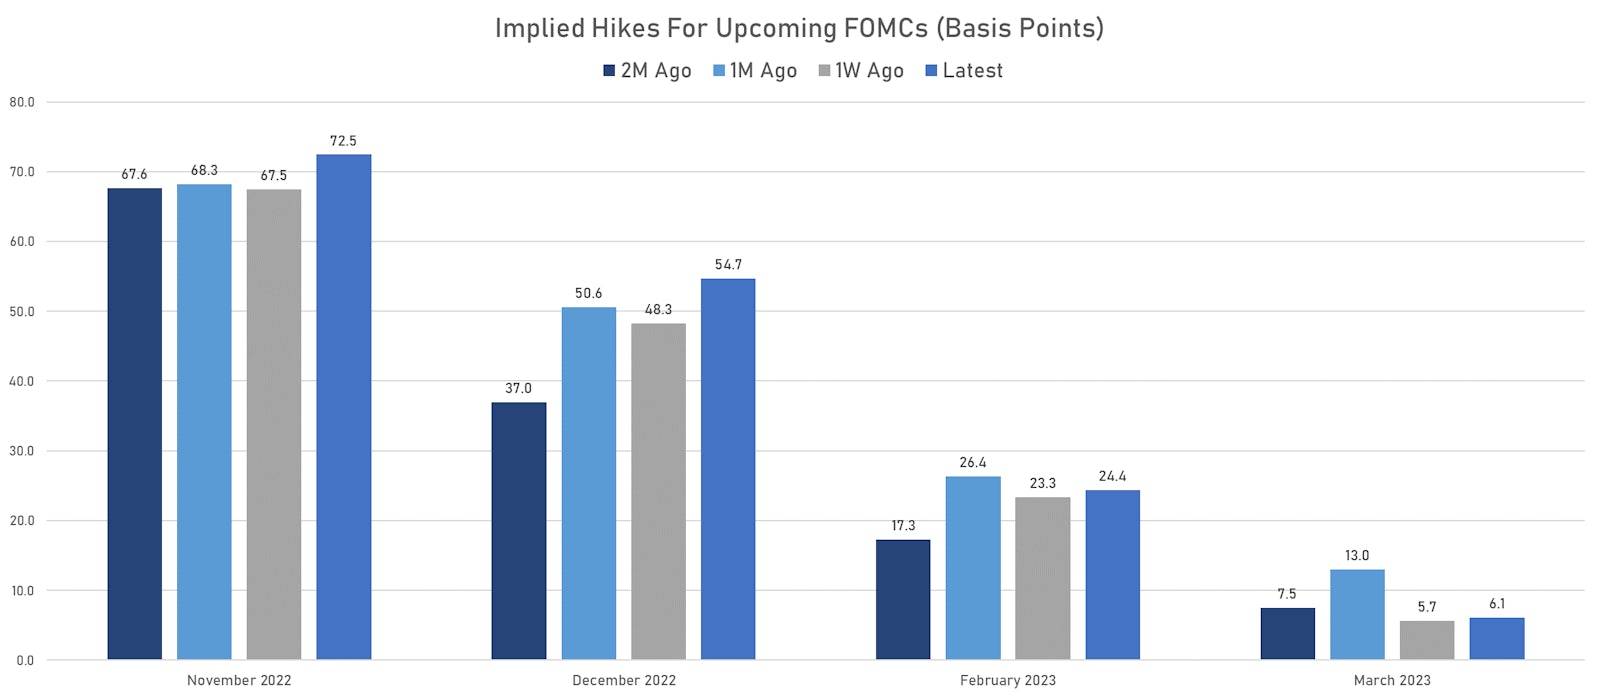 Changes In Market Implied Hikes At Upcoming FOMCs | Sources: ϕpost, Refinitiv data